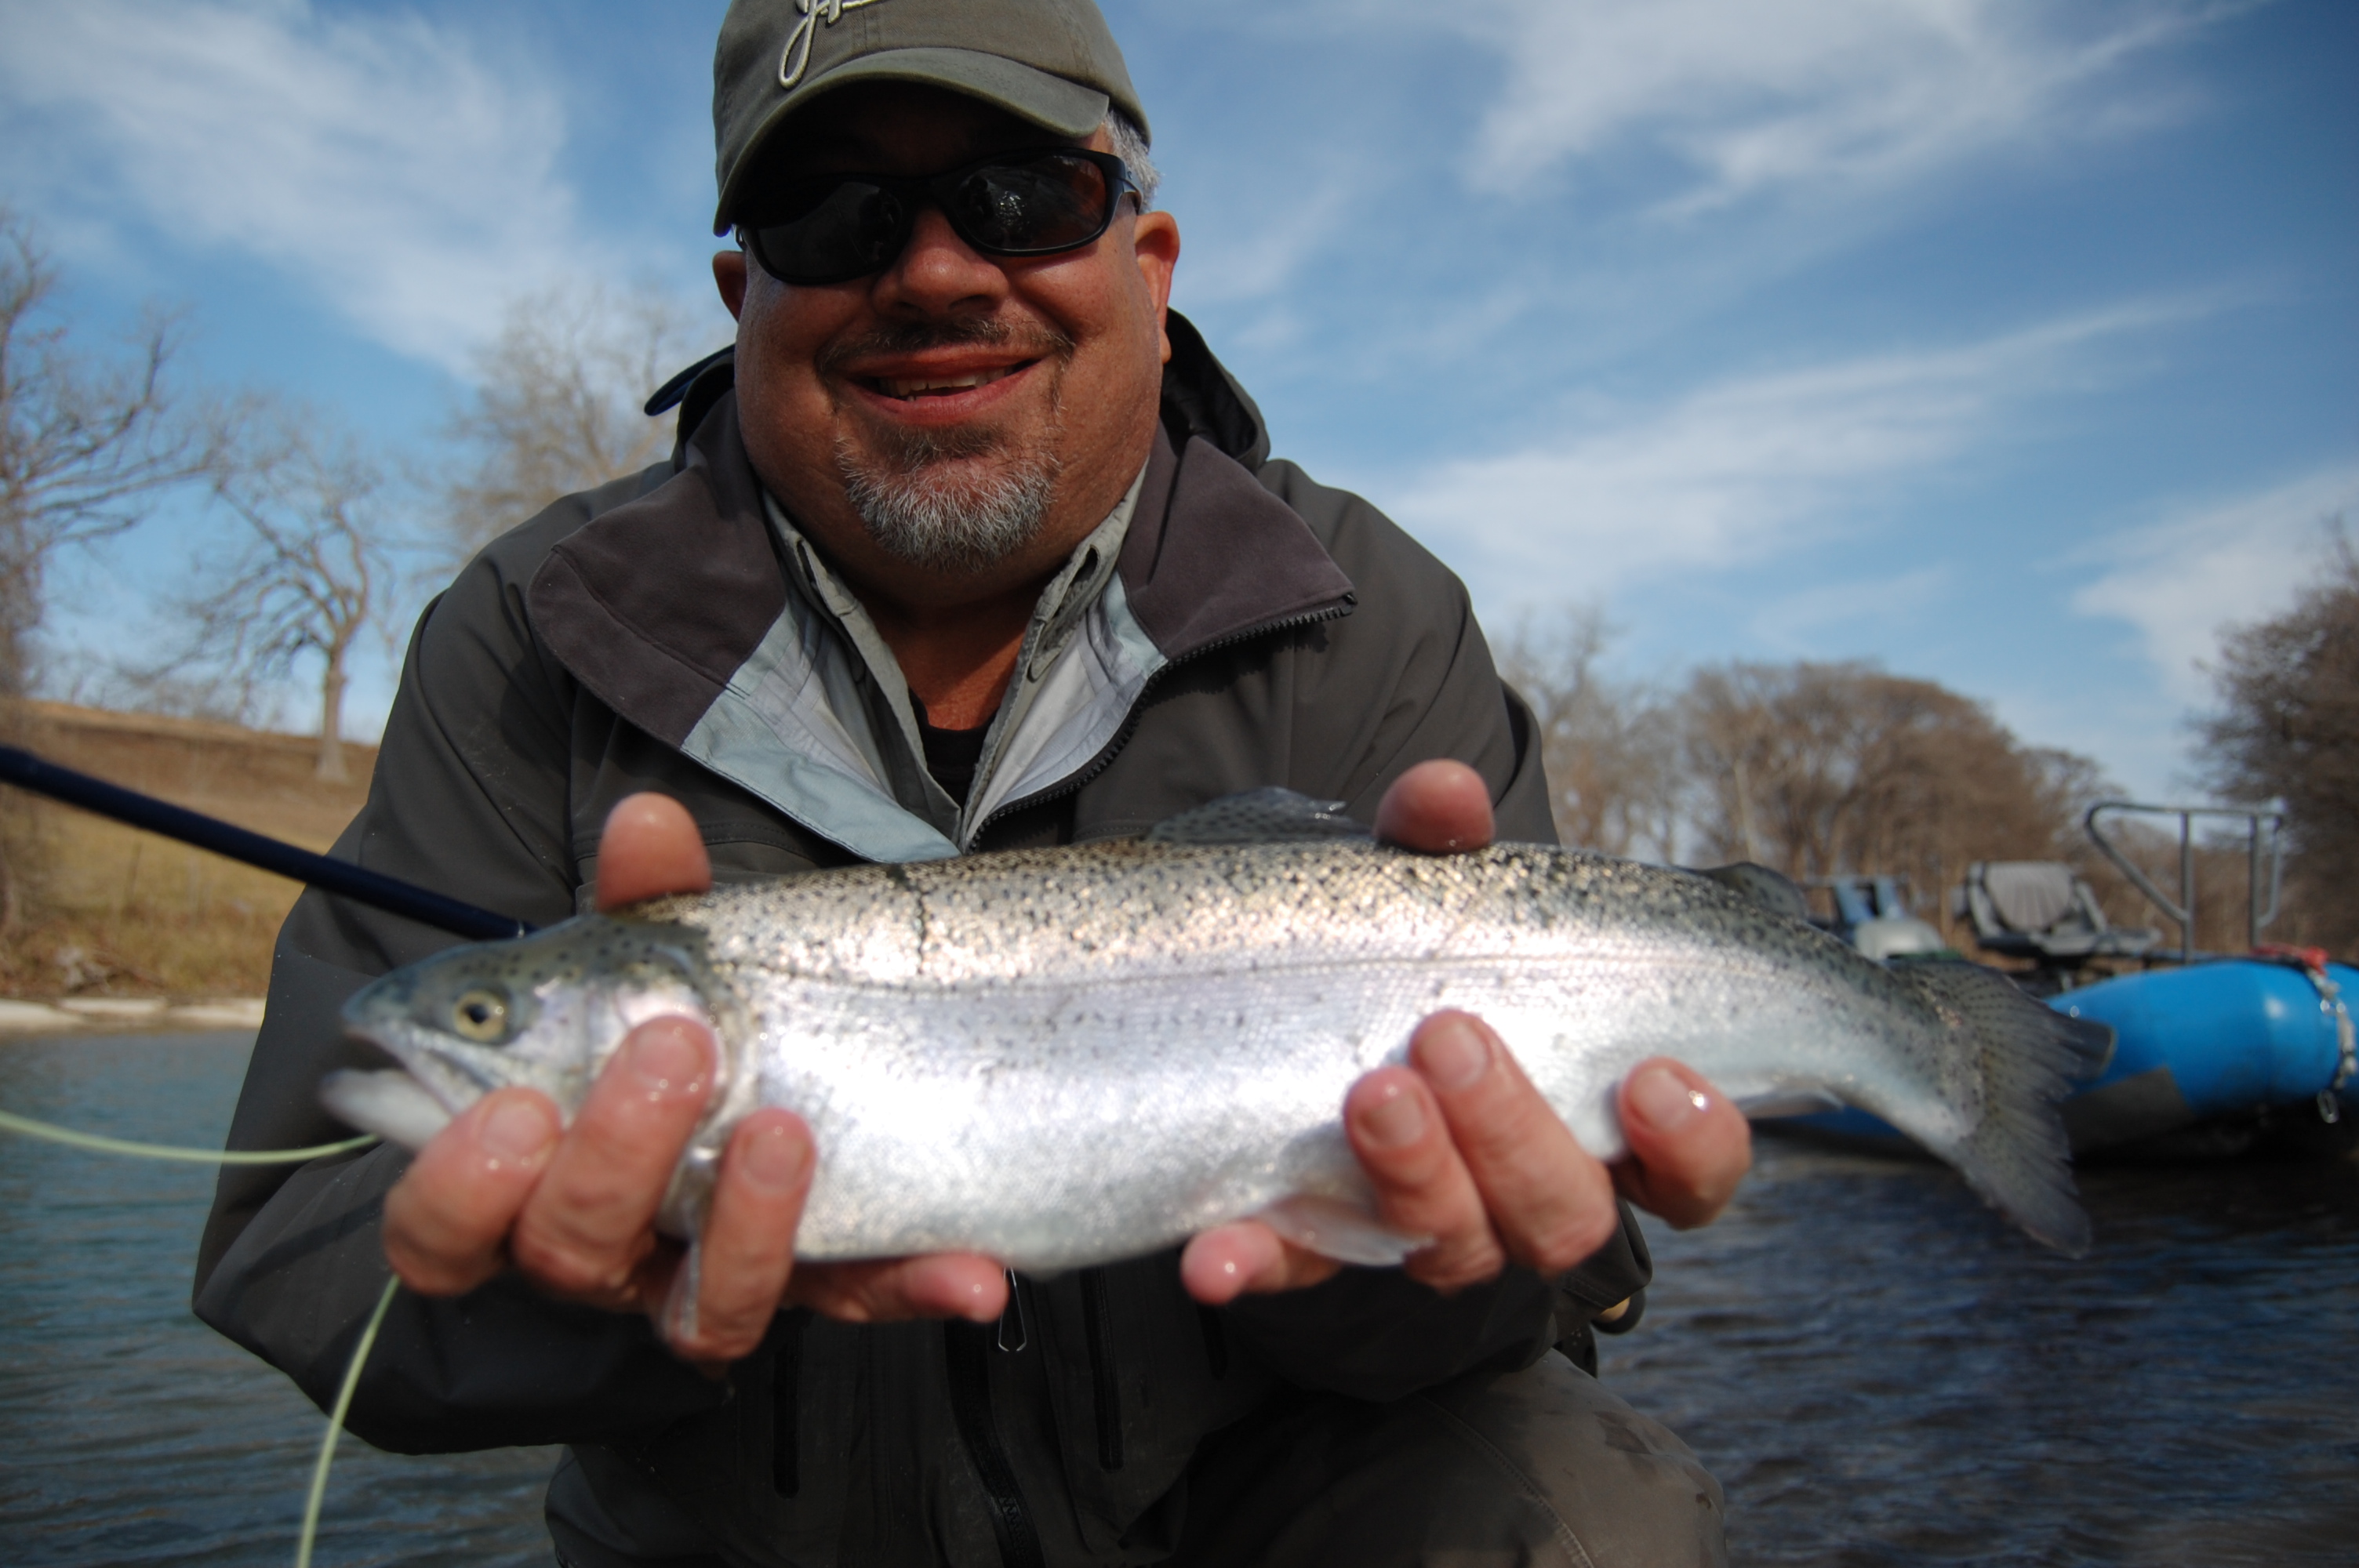 Fly Fishing Classes, Lessons, Instruction near Austin and San Antonio